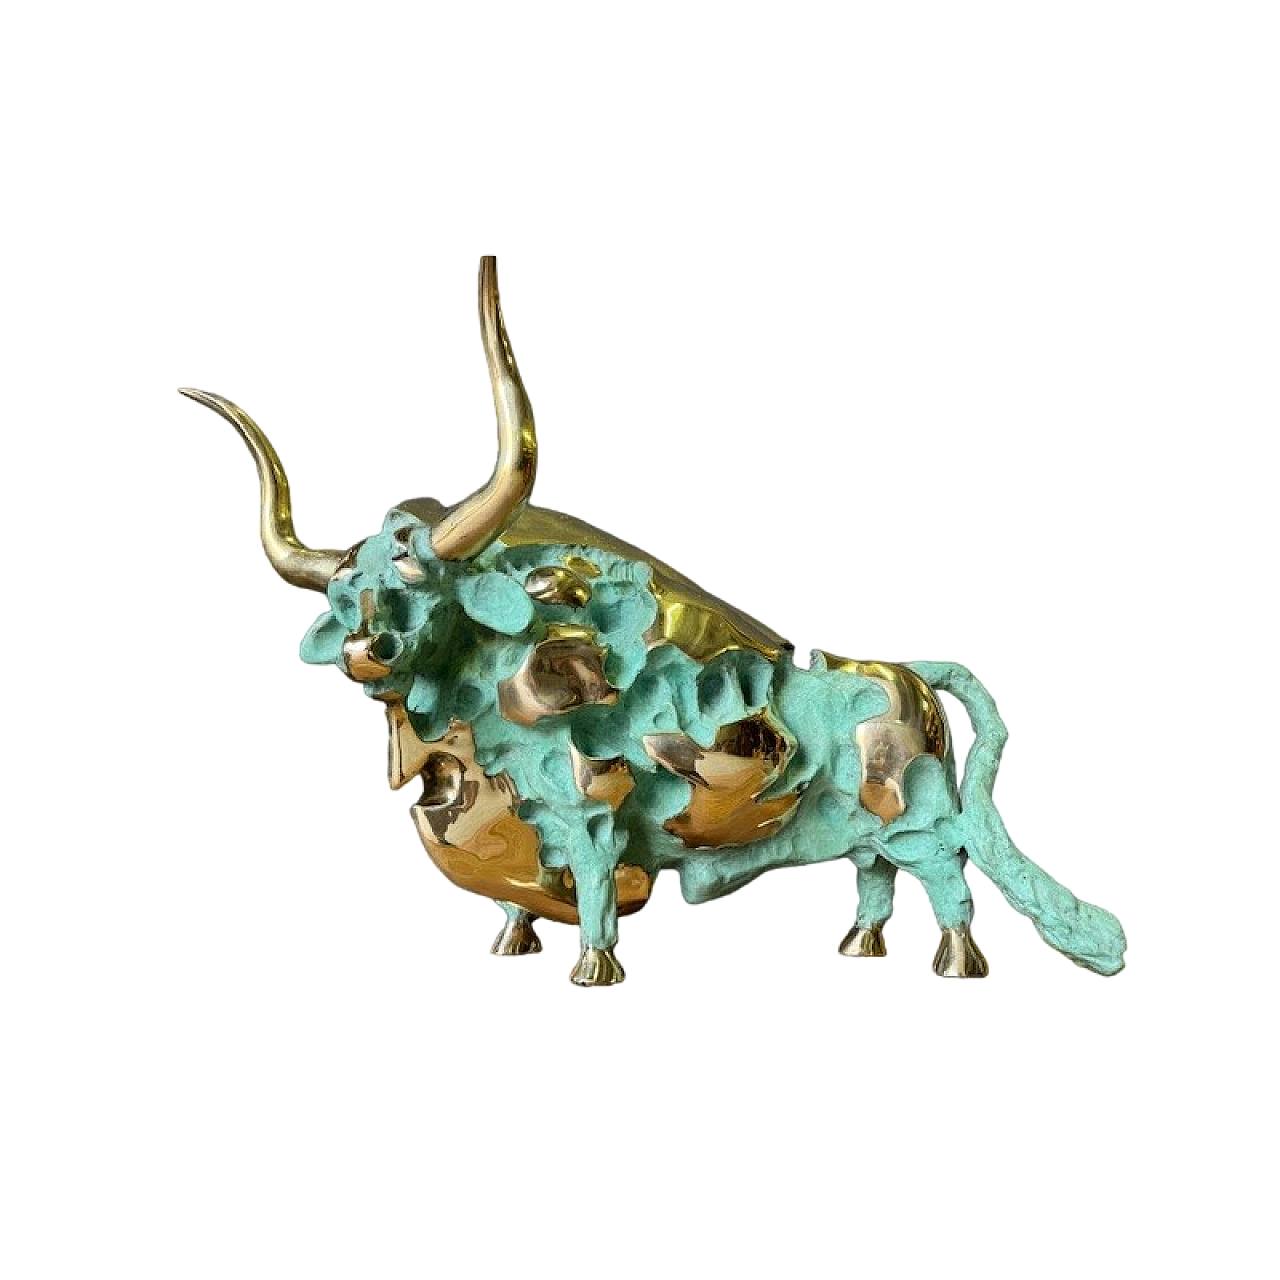 Oxidized and polished bronze bull sculpture 9